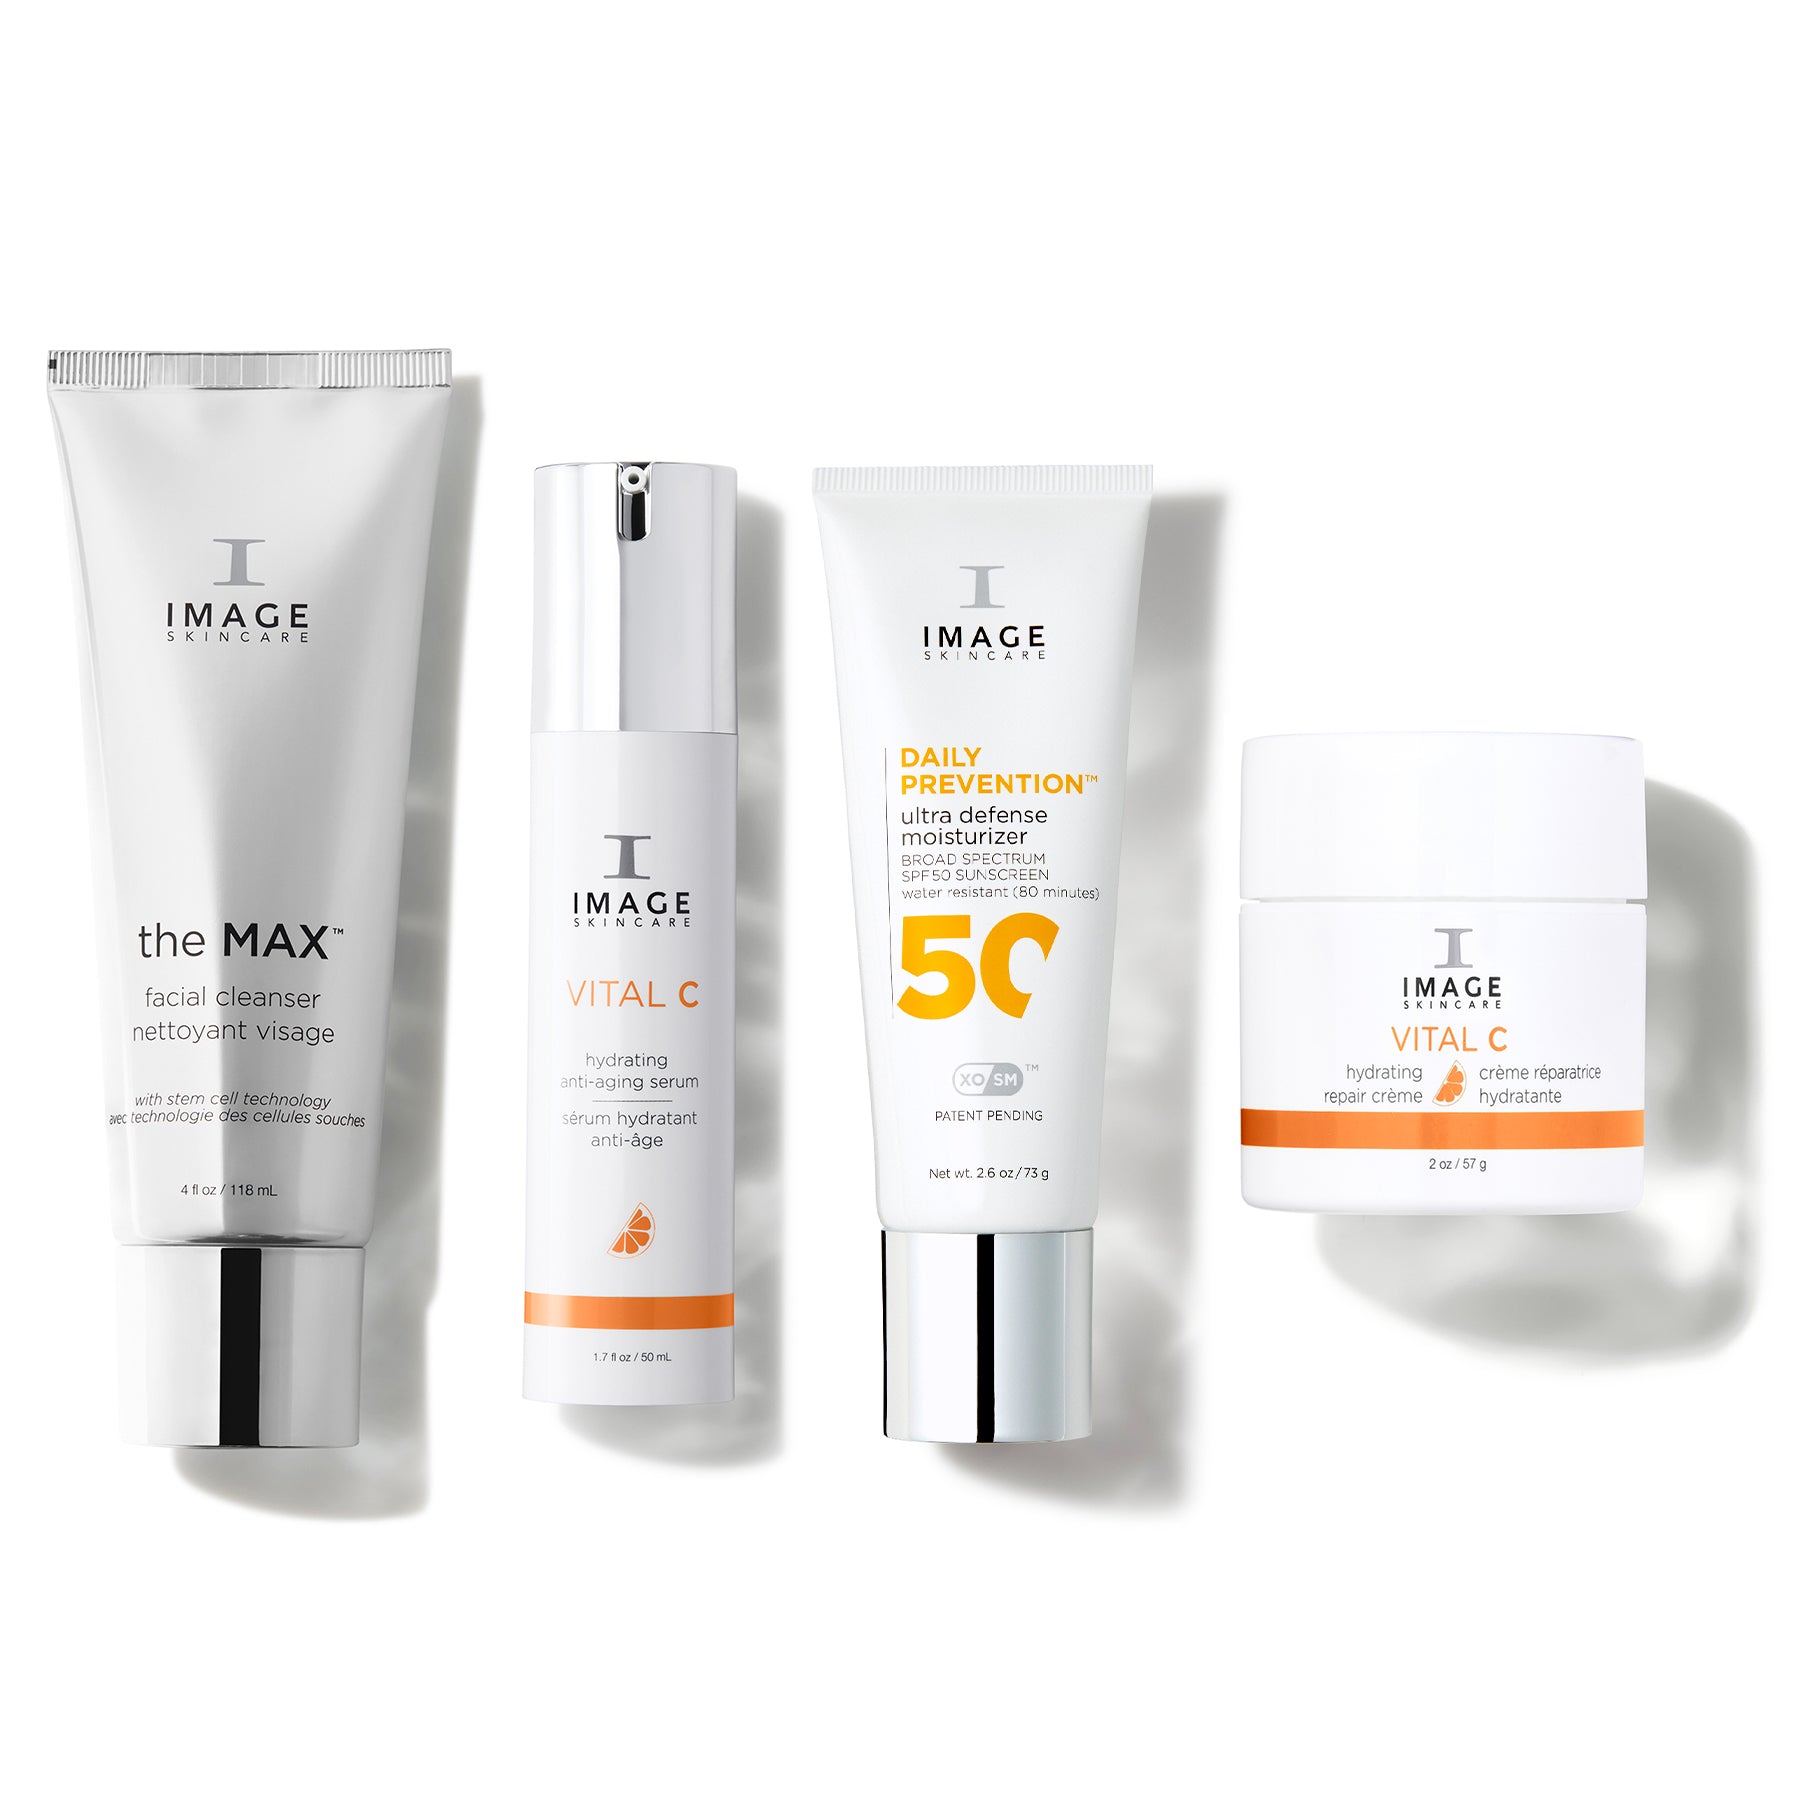 dryness and hydration set